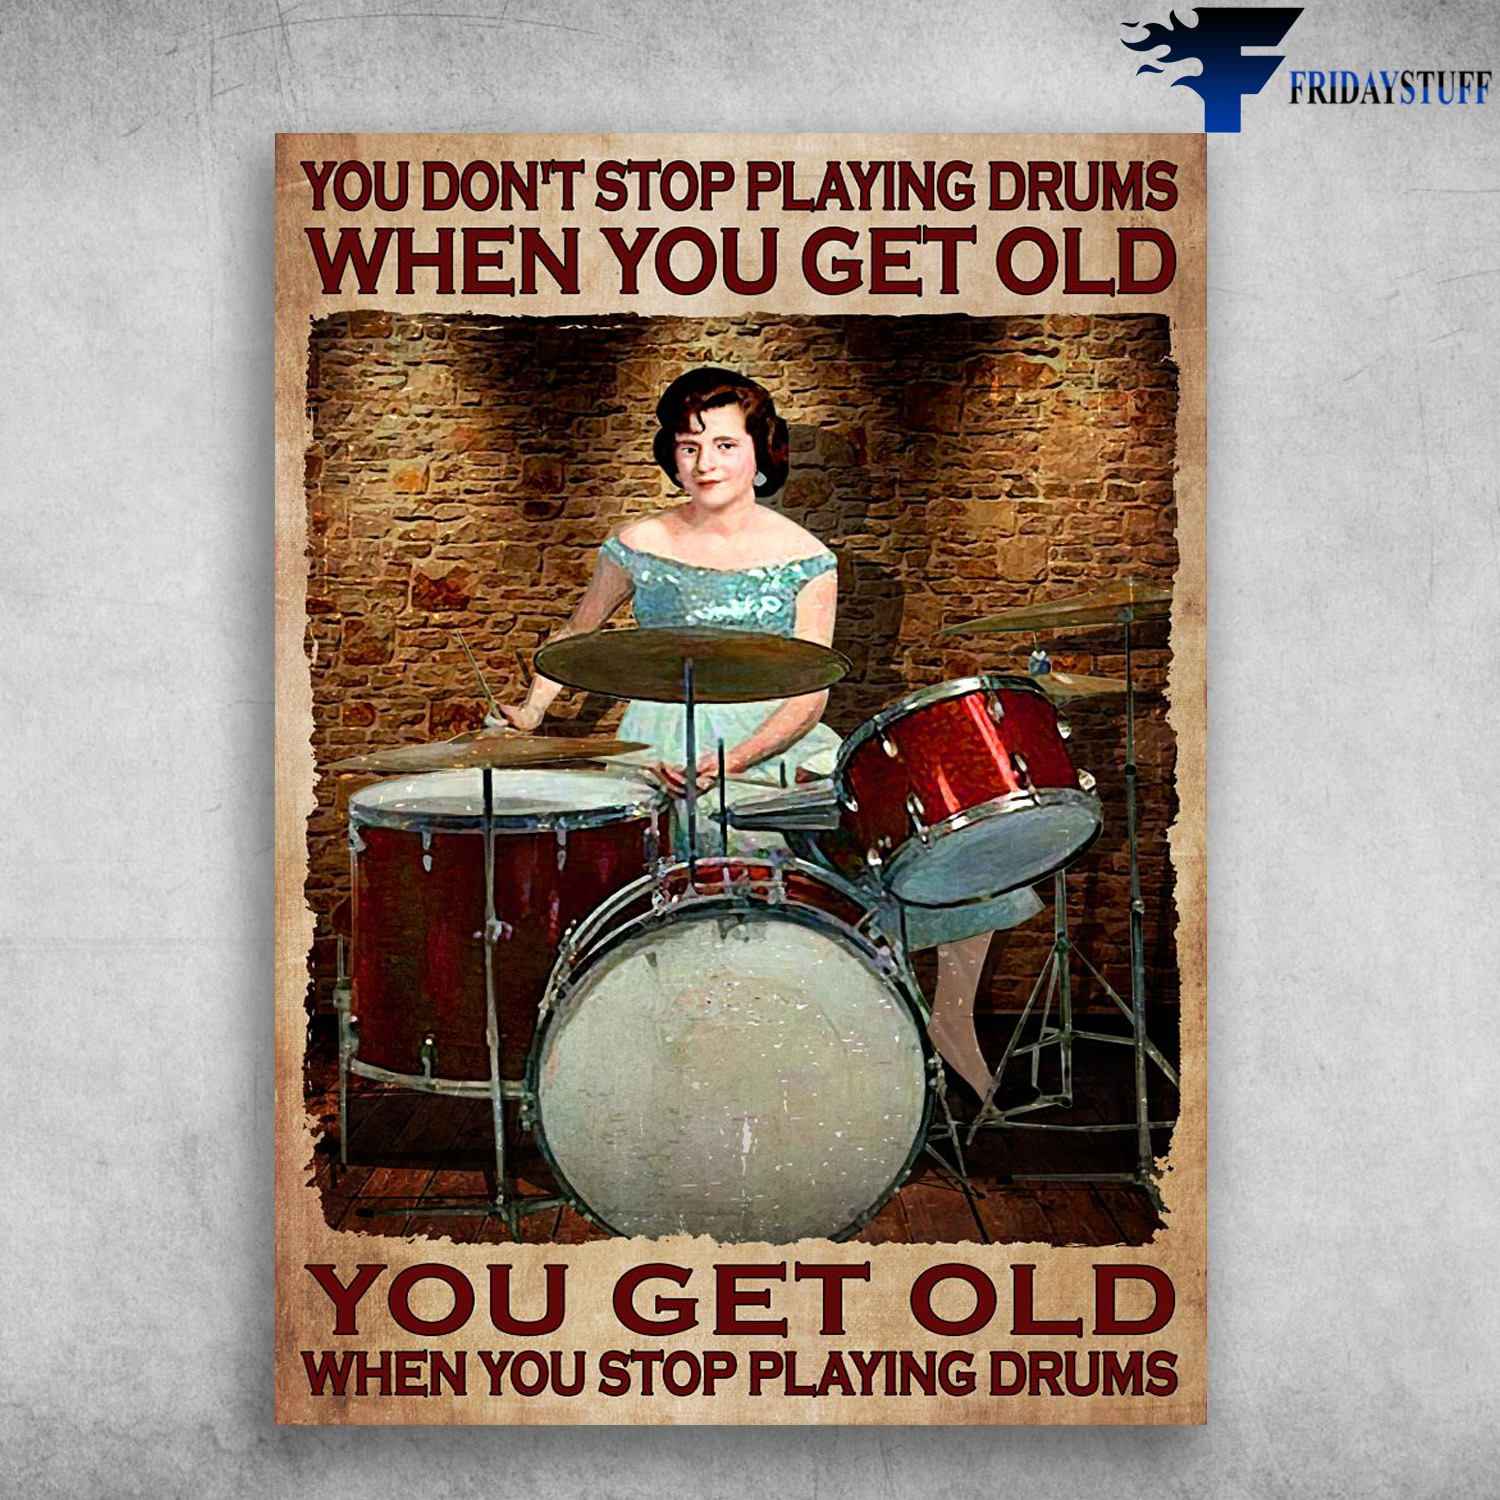 Lady Druming, Drums Lover - You Don't Stop Playing Drums When You Get Old, You Get Old When You Stop Playing Drums